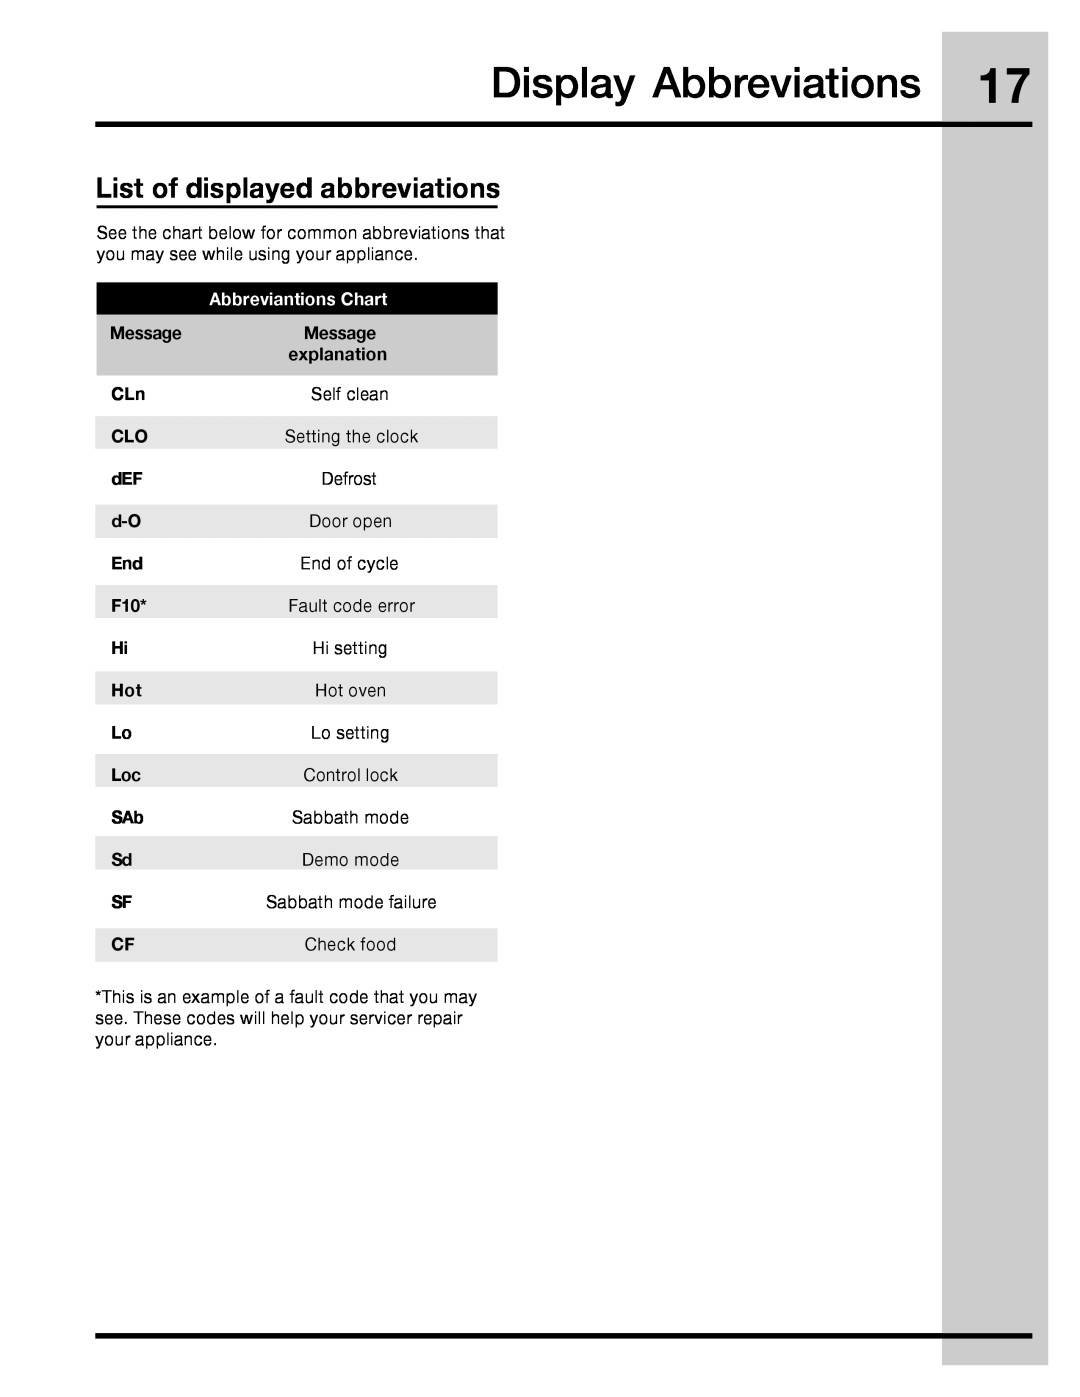 Electrolux 316471113 Display Abbreviations, List of displayed abbreviations, Abbreviantions Chart, Message, explanation 